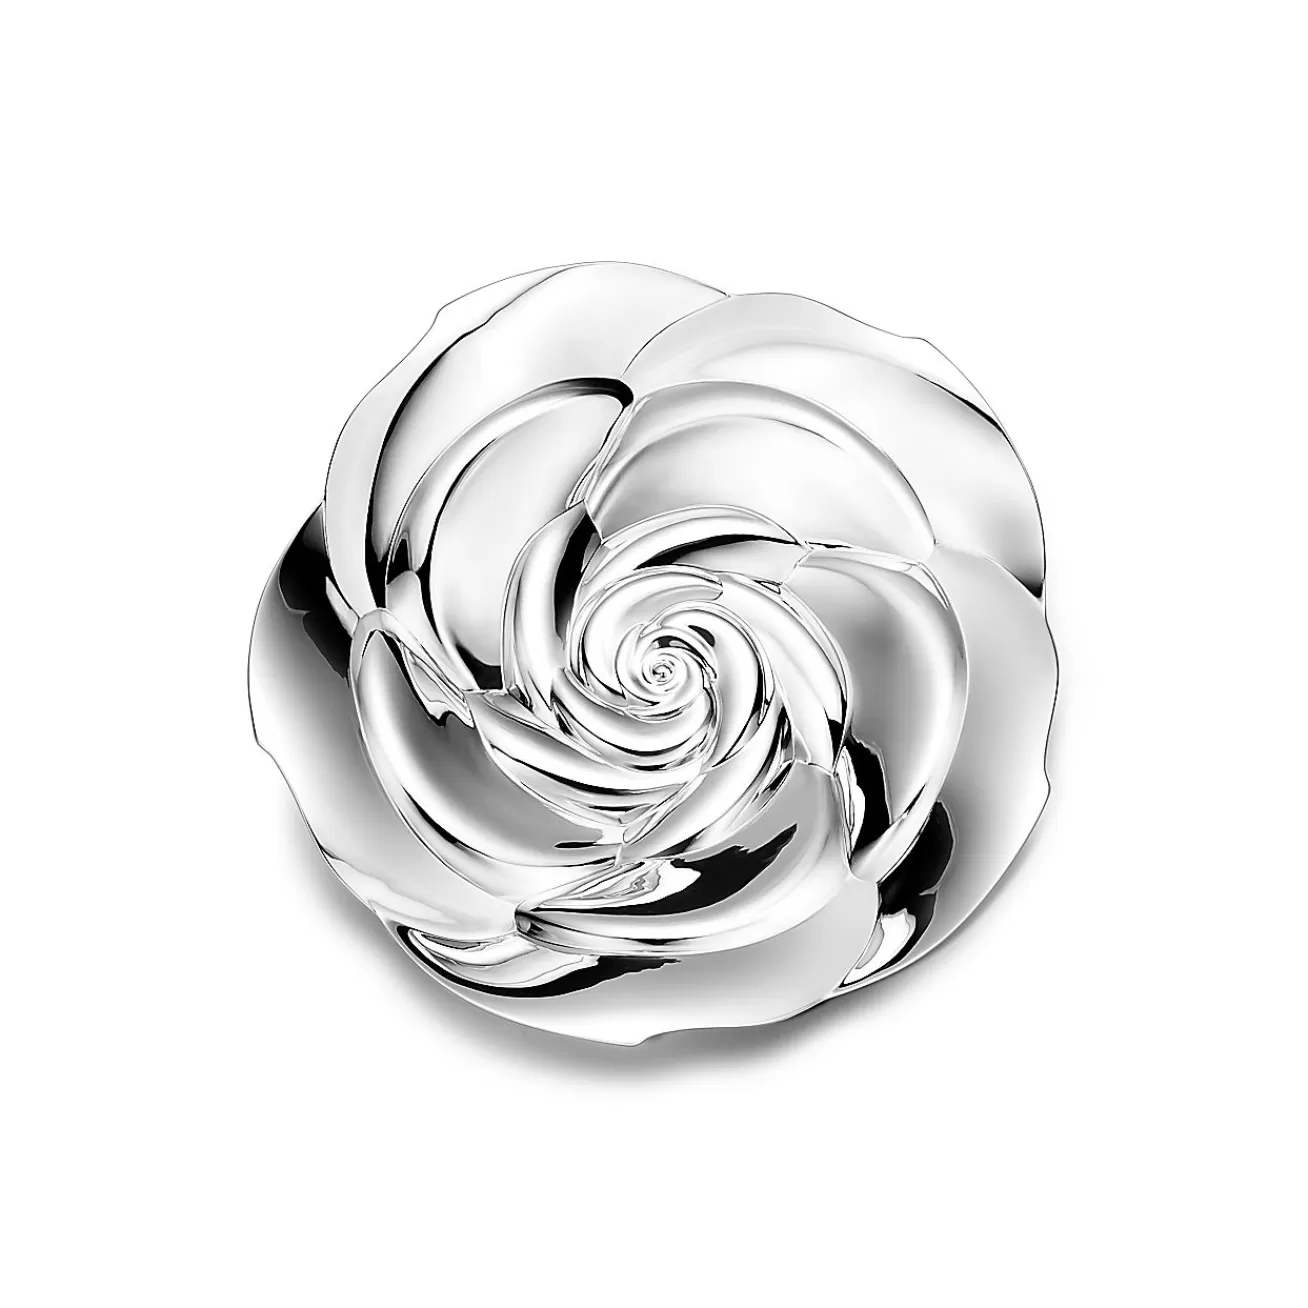 Tiffany & Co. Tiffany Home Essentials Rose Vide Poche in Sterling Silver | ^ The Home | Housewarming Gifts